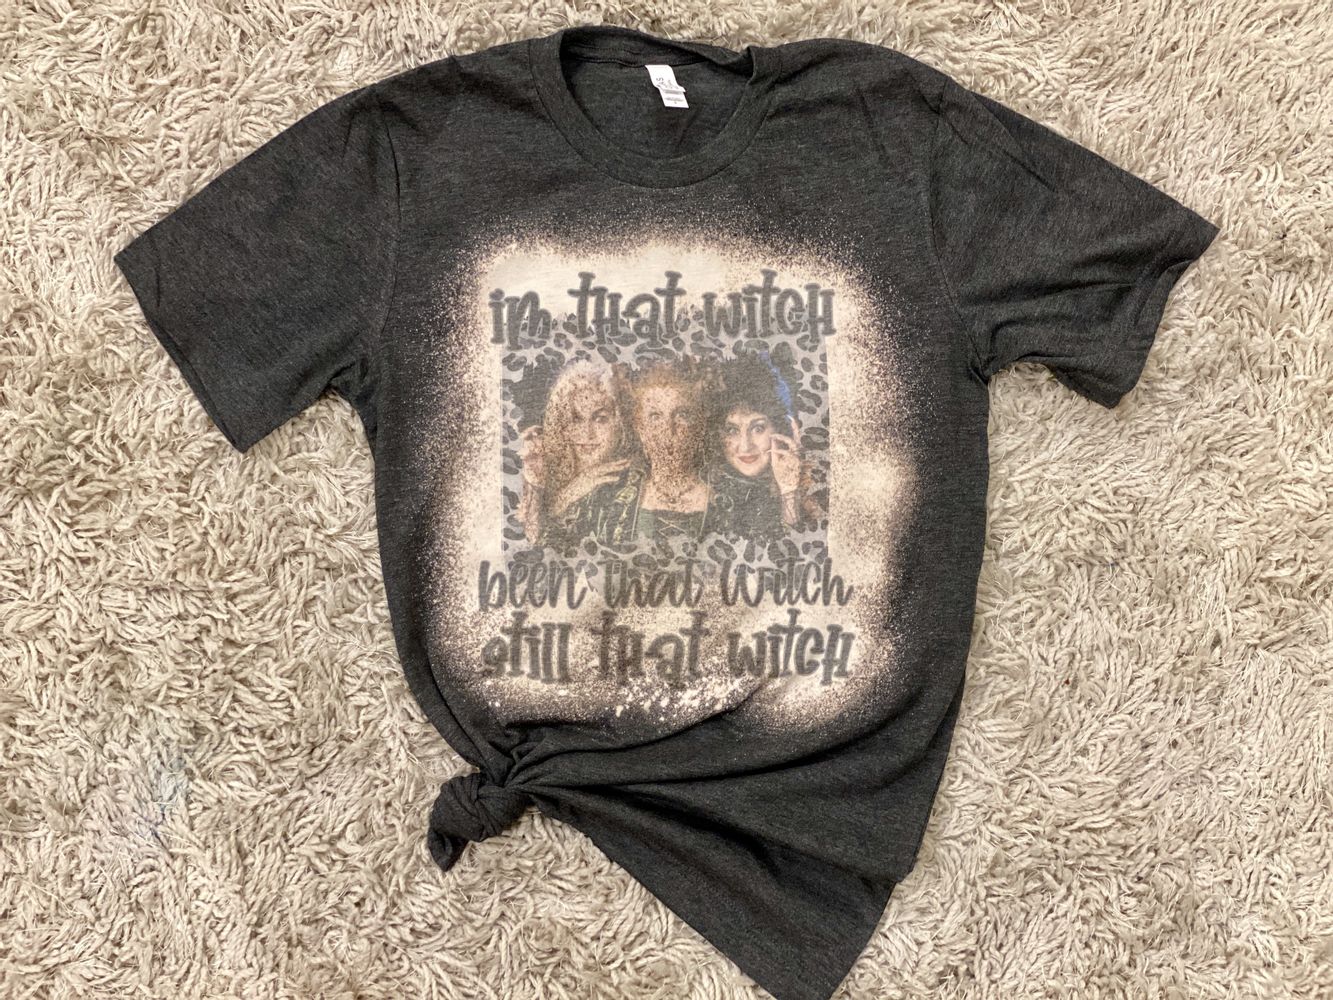 Im That Witch, Been That Witch (Hocus Pocus) Tee